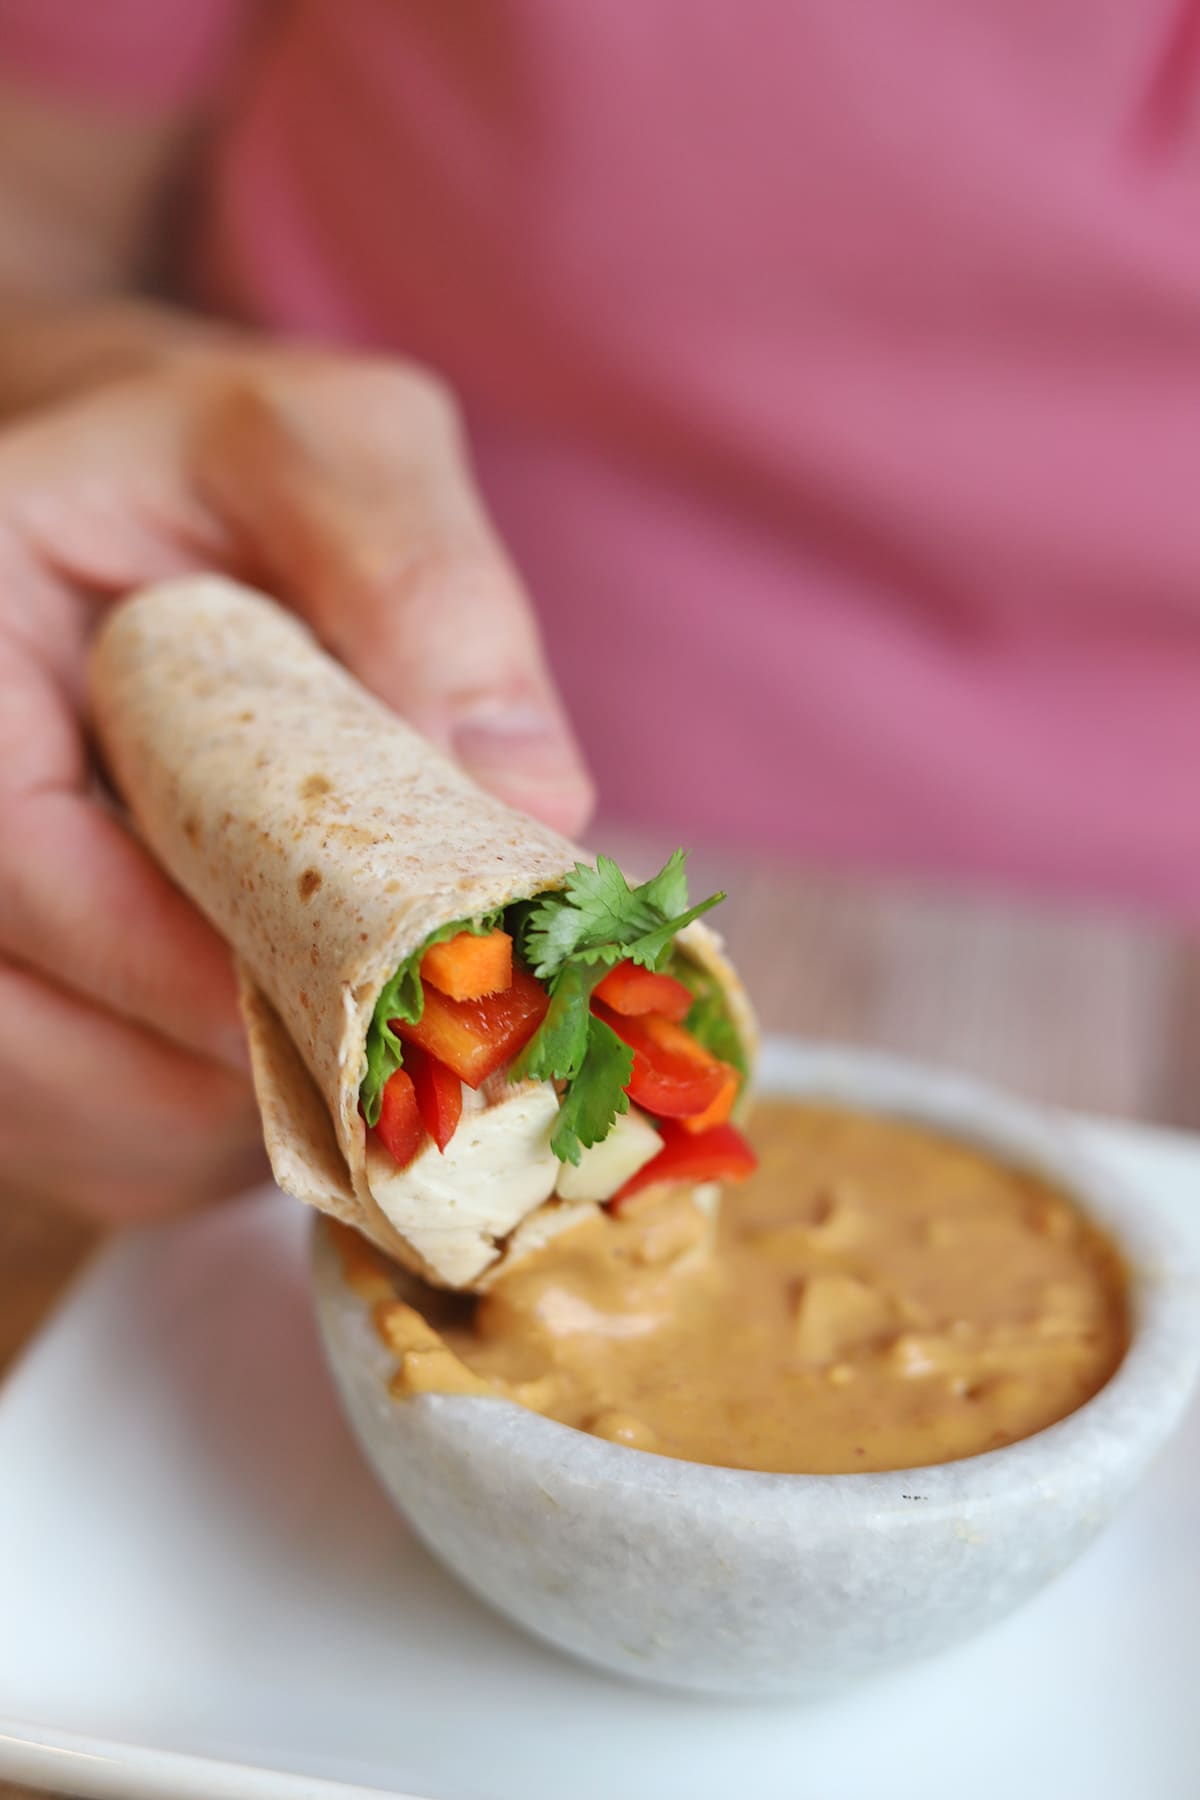 Tortilla wrap being dipped into bowl of peanut sauce.